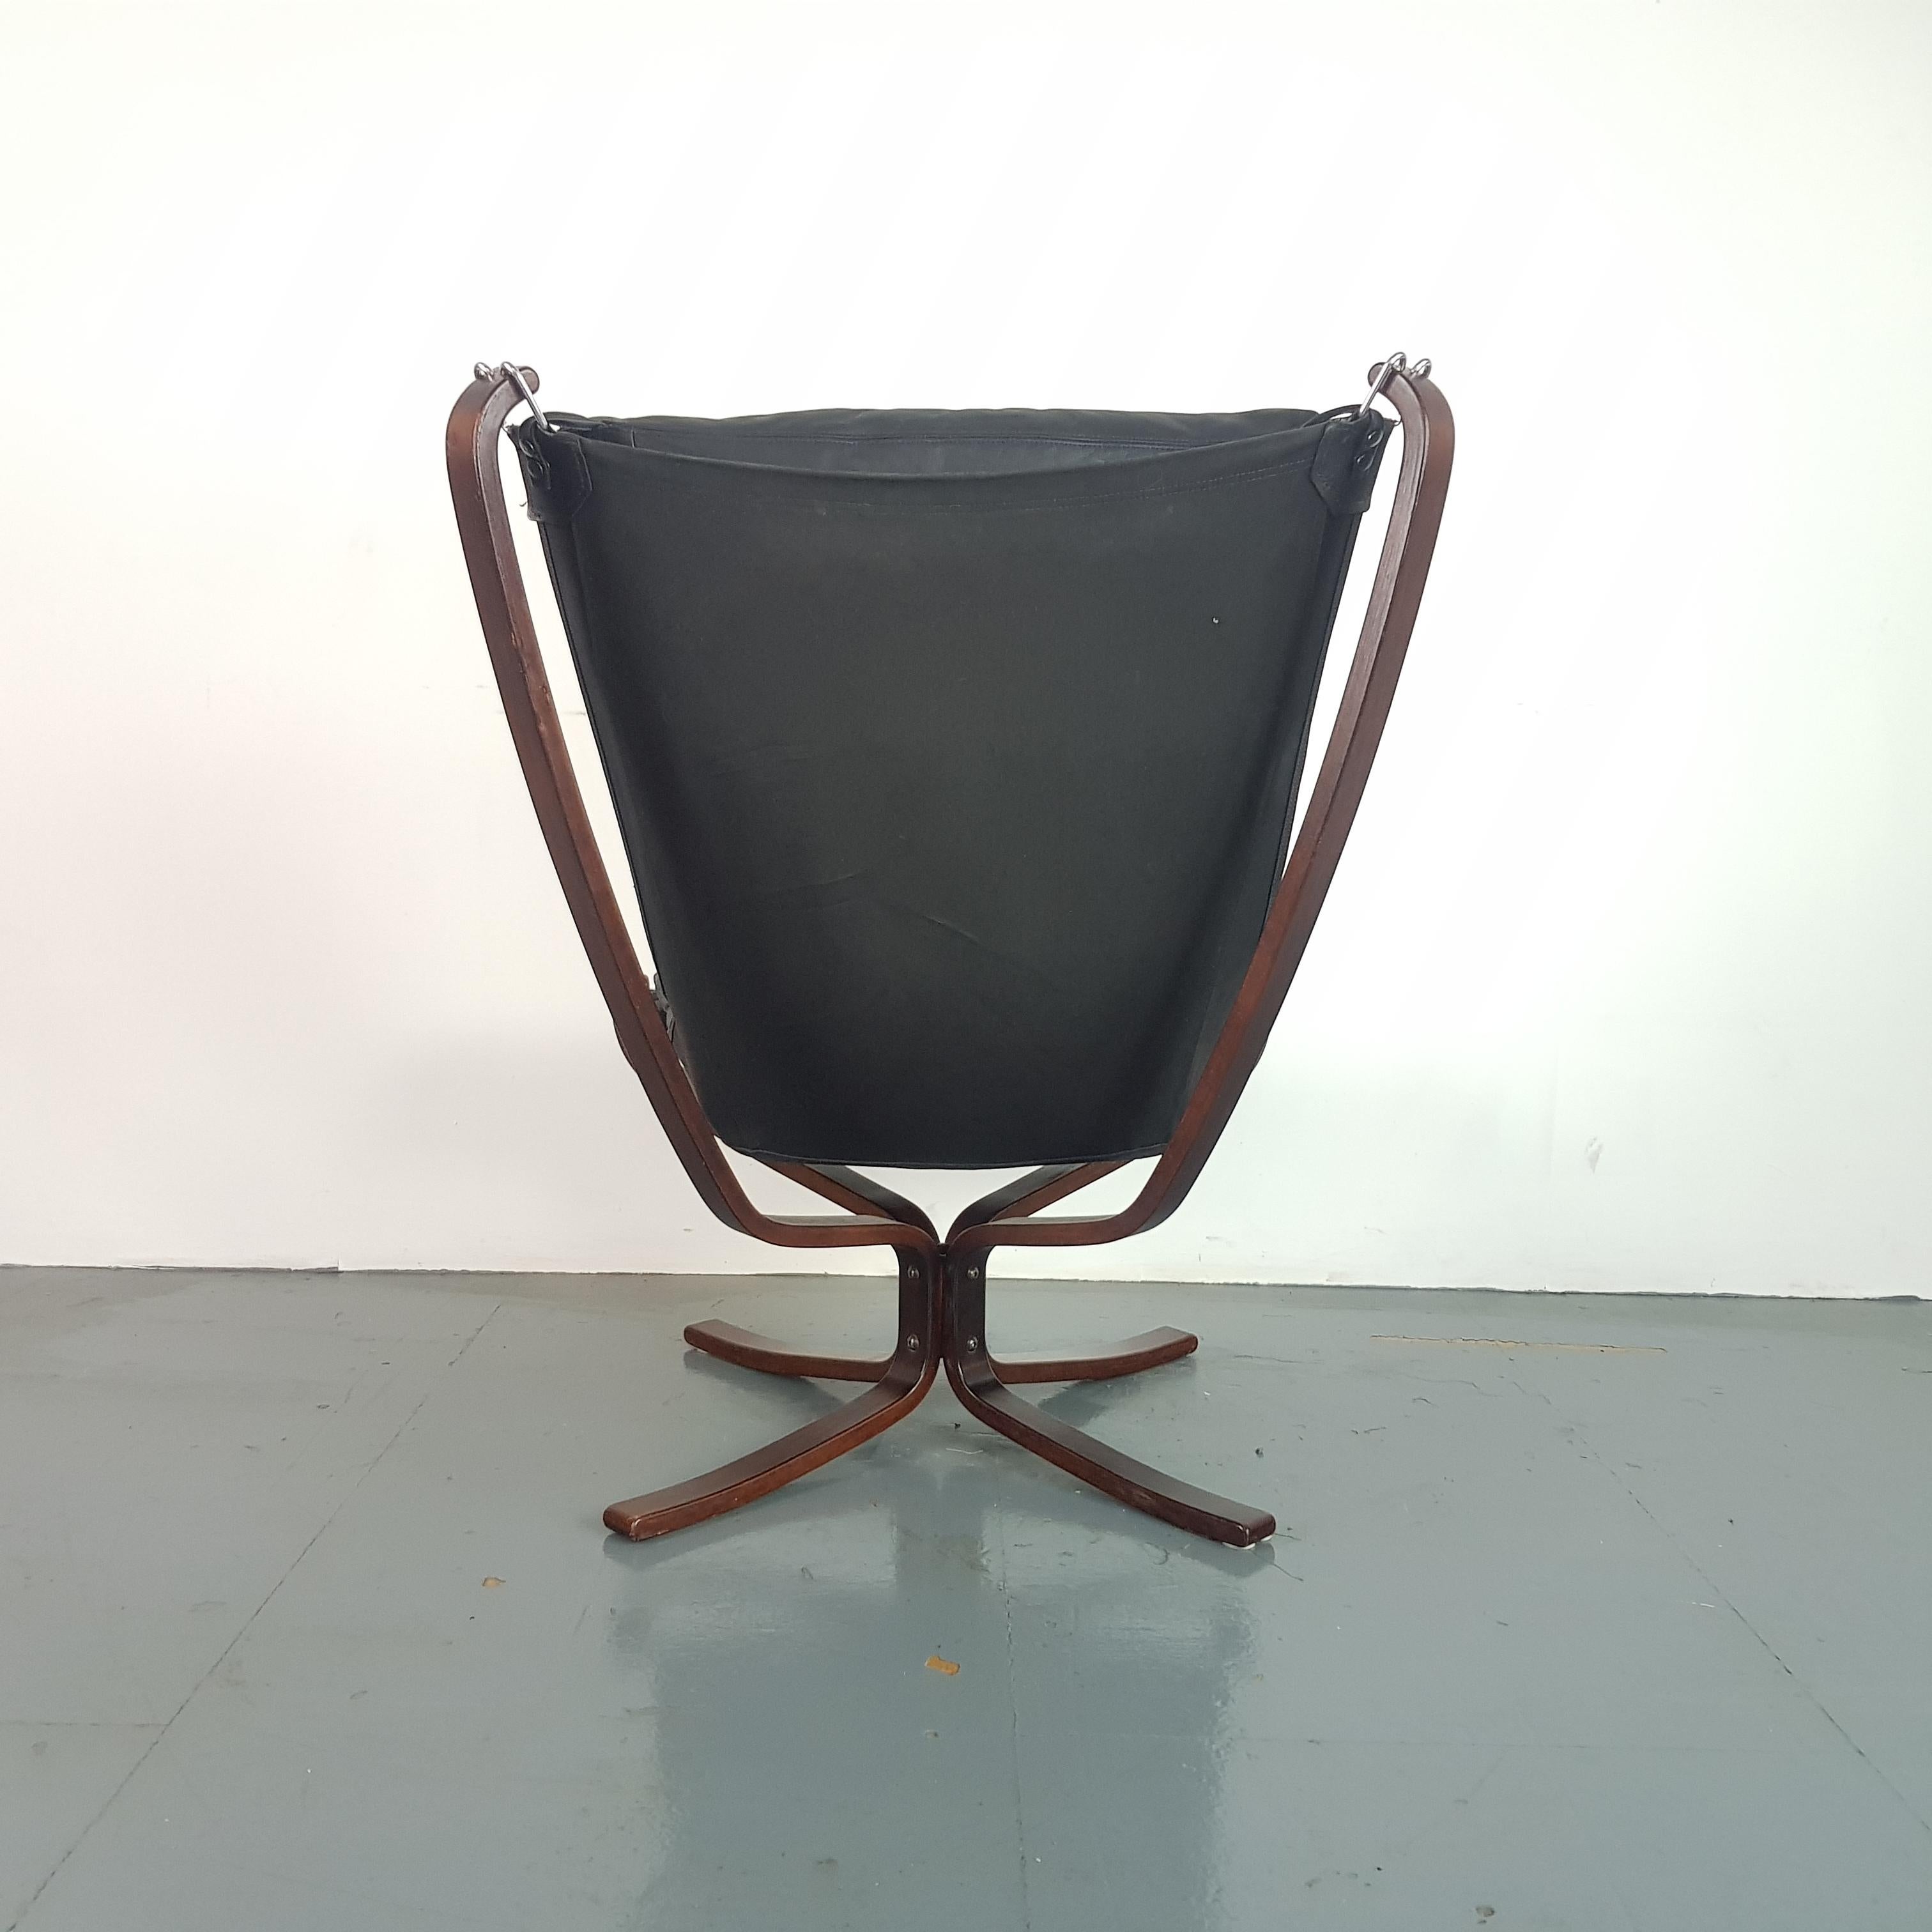 Lovely vintage high back black leather Falcon chair designed by Sigurd Resell.

In good vintage condition. There is some age-related wear, as expected, but nothing really noticeable. The leather is in good condition with no rips or tears. 

The